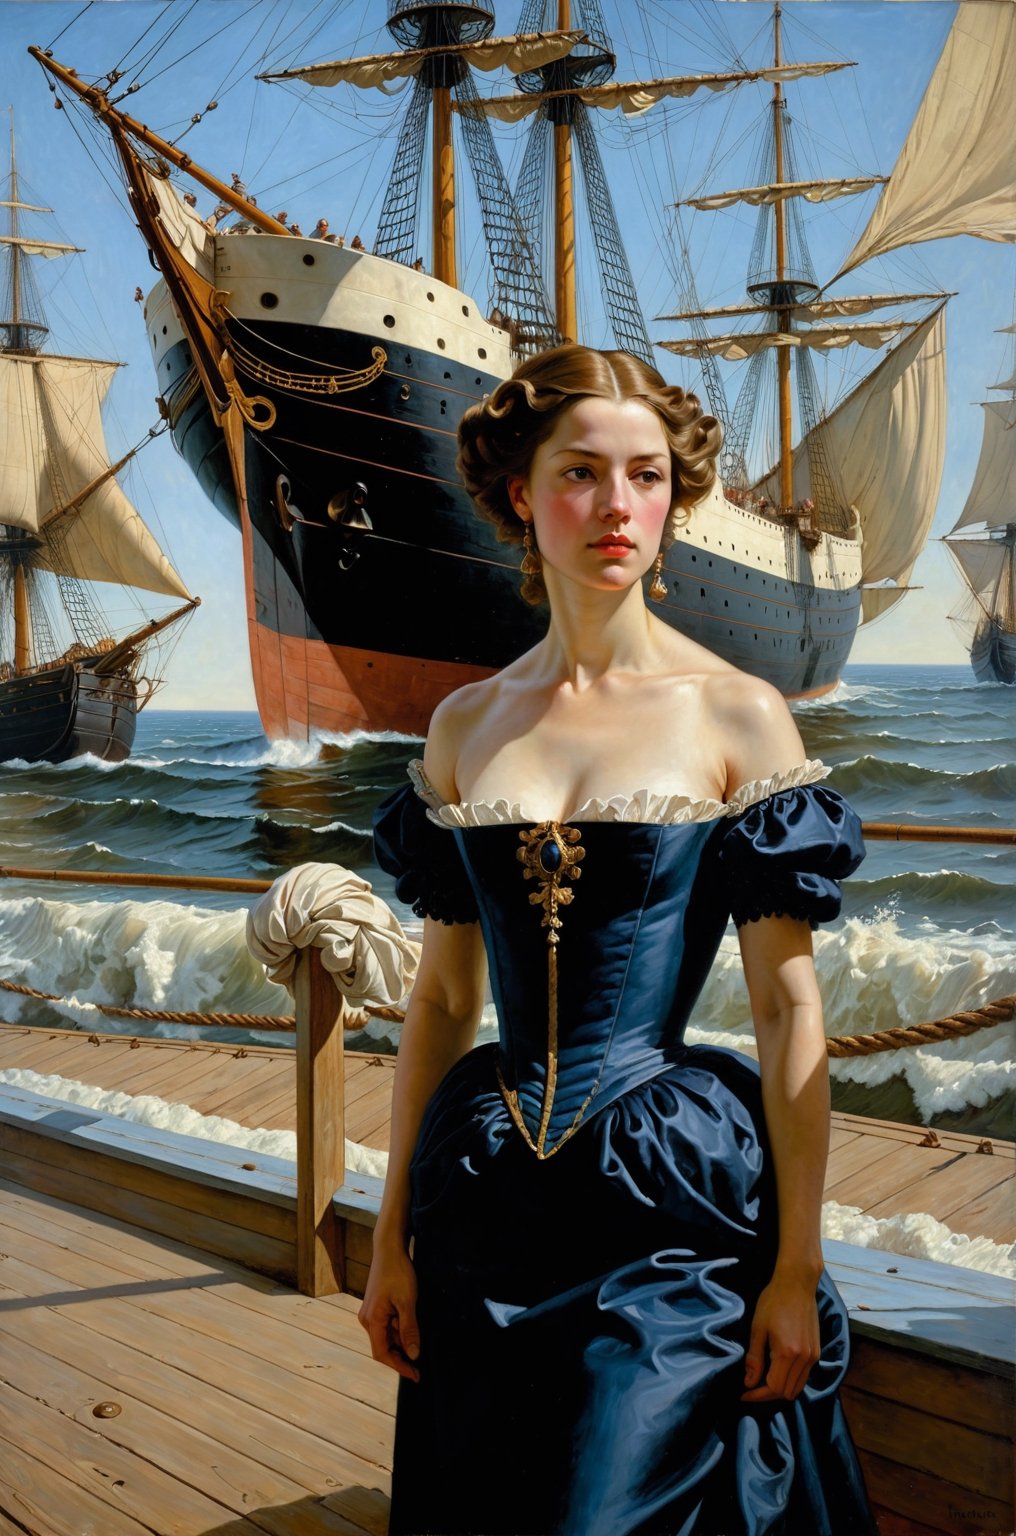 masterpiece, highly detailed,, baroque art, chiaroscuro, Tenebrism, style of Bo Bartlett, Gerald Brom and phil noto, outdoors, ship, shore, (dynamic pose:1.2), Theatrical intensity, Baroque Allegory, rough brushstroke, Emotional Storytelling, Intense contrasts, surreal